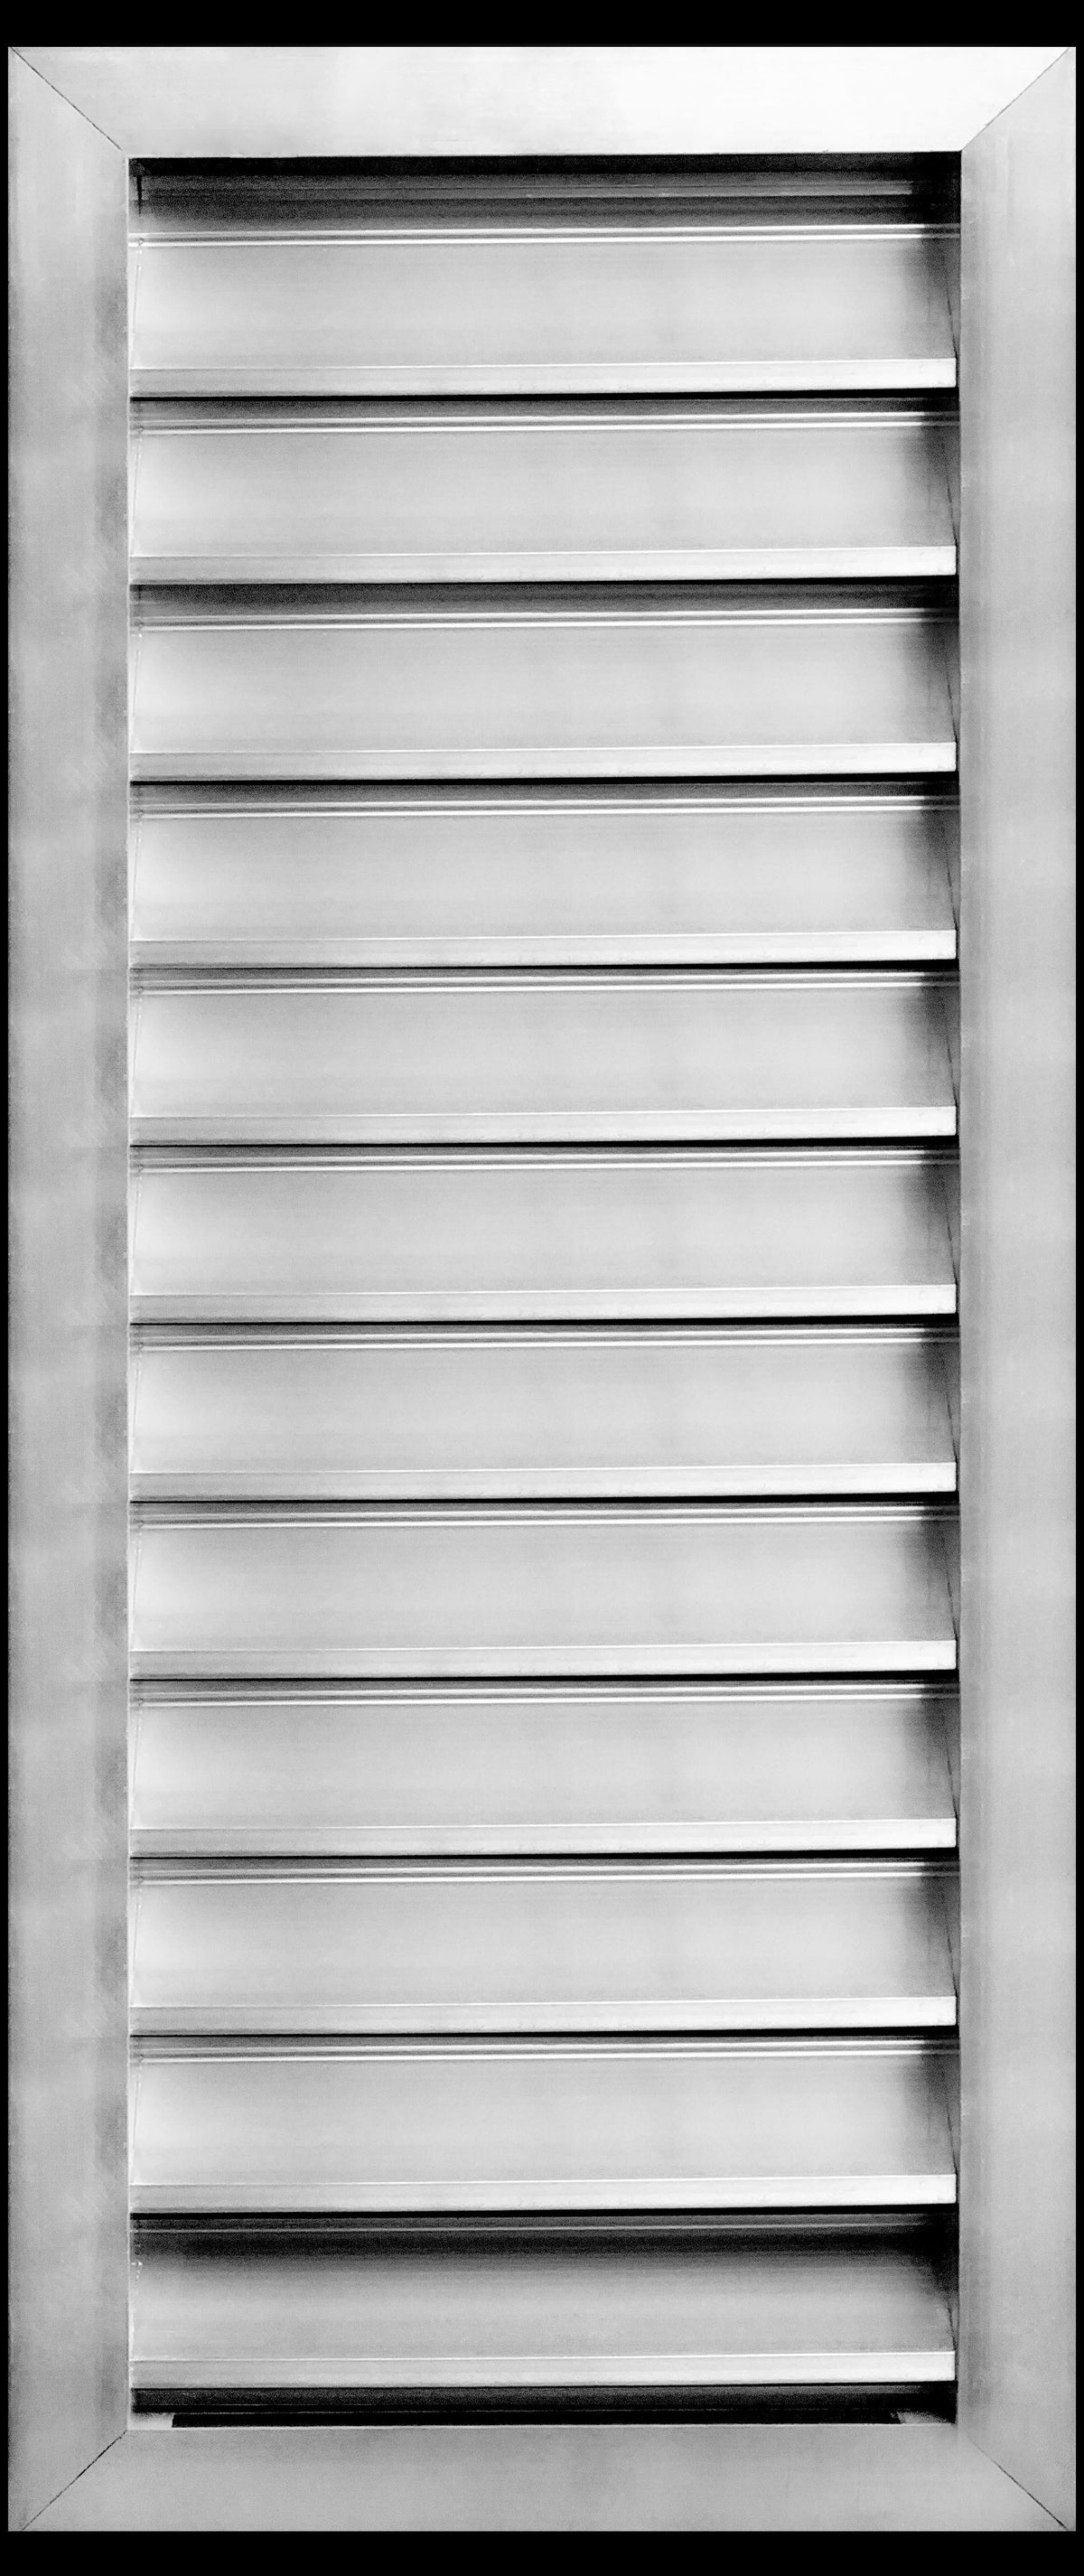 10&quot;w X 28&quot;h Aluminum Outdoor Weather Proof Louvers - Rain &amp; Waterproof Air Vent With Screen Mesh